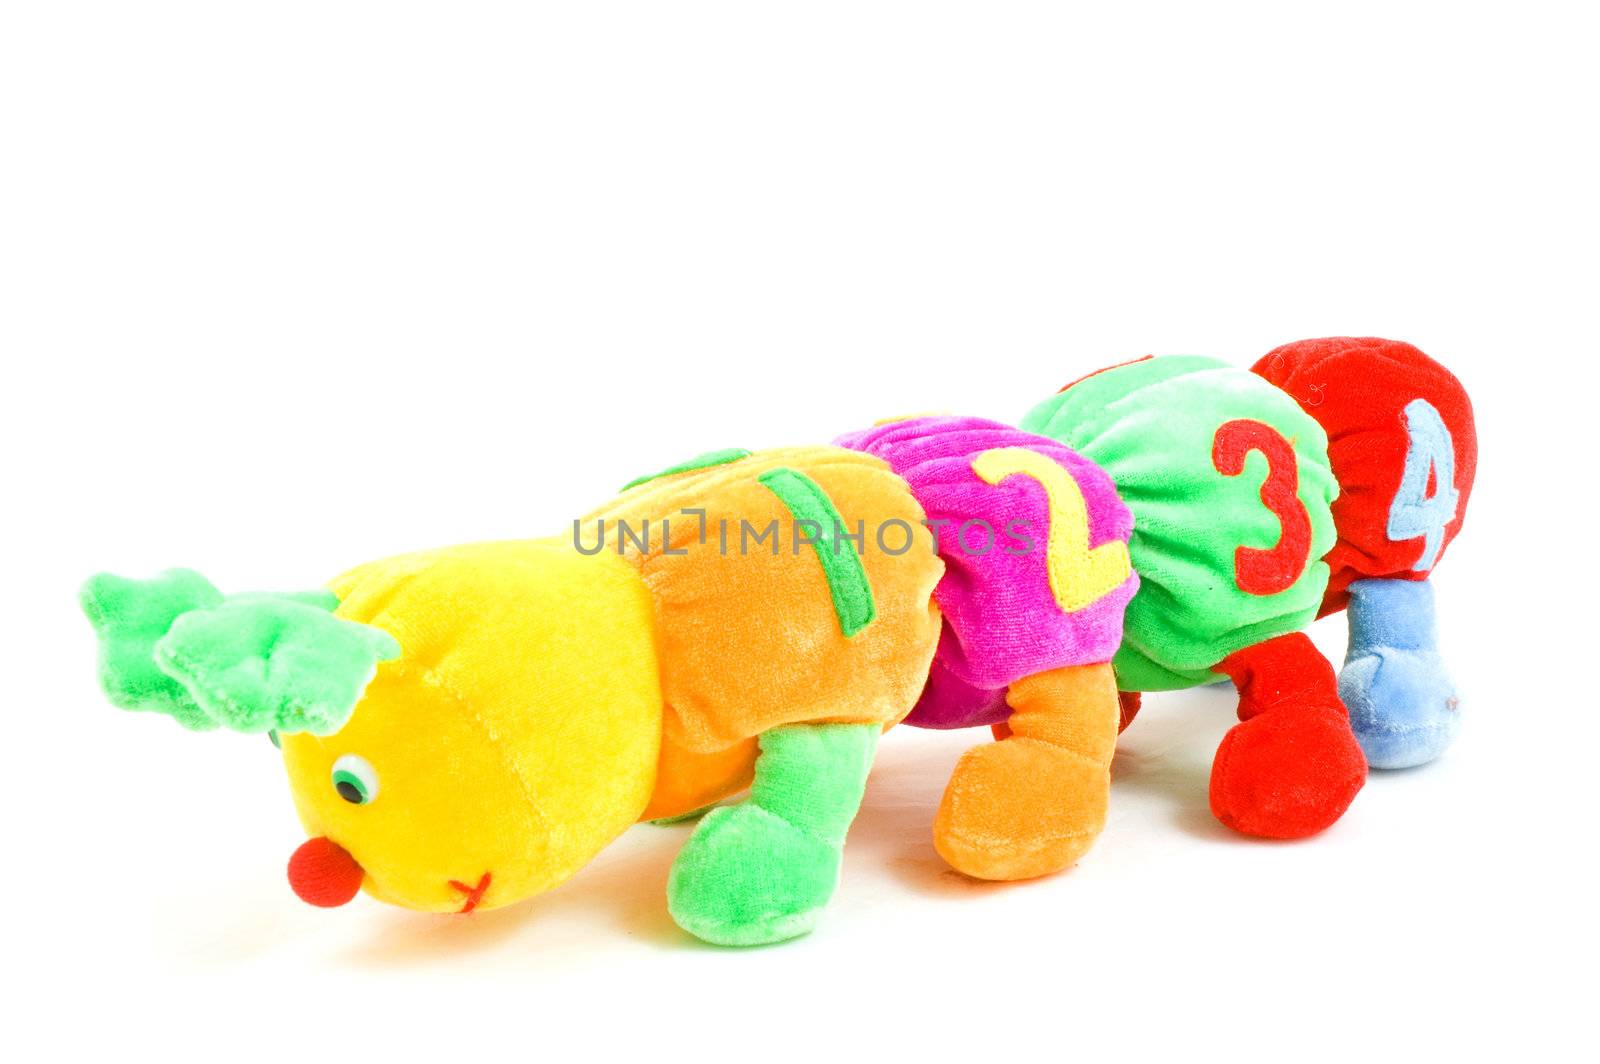 kids caterpillar toy with 1234 (focus on the 4) by ladyminnie